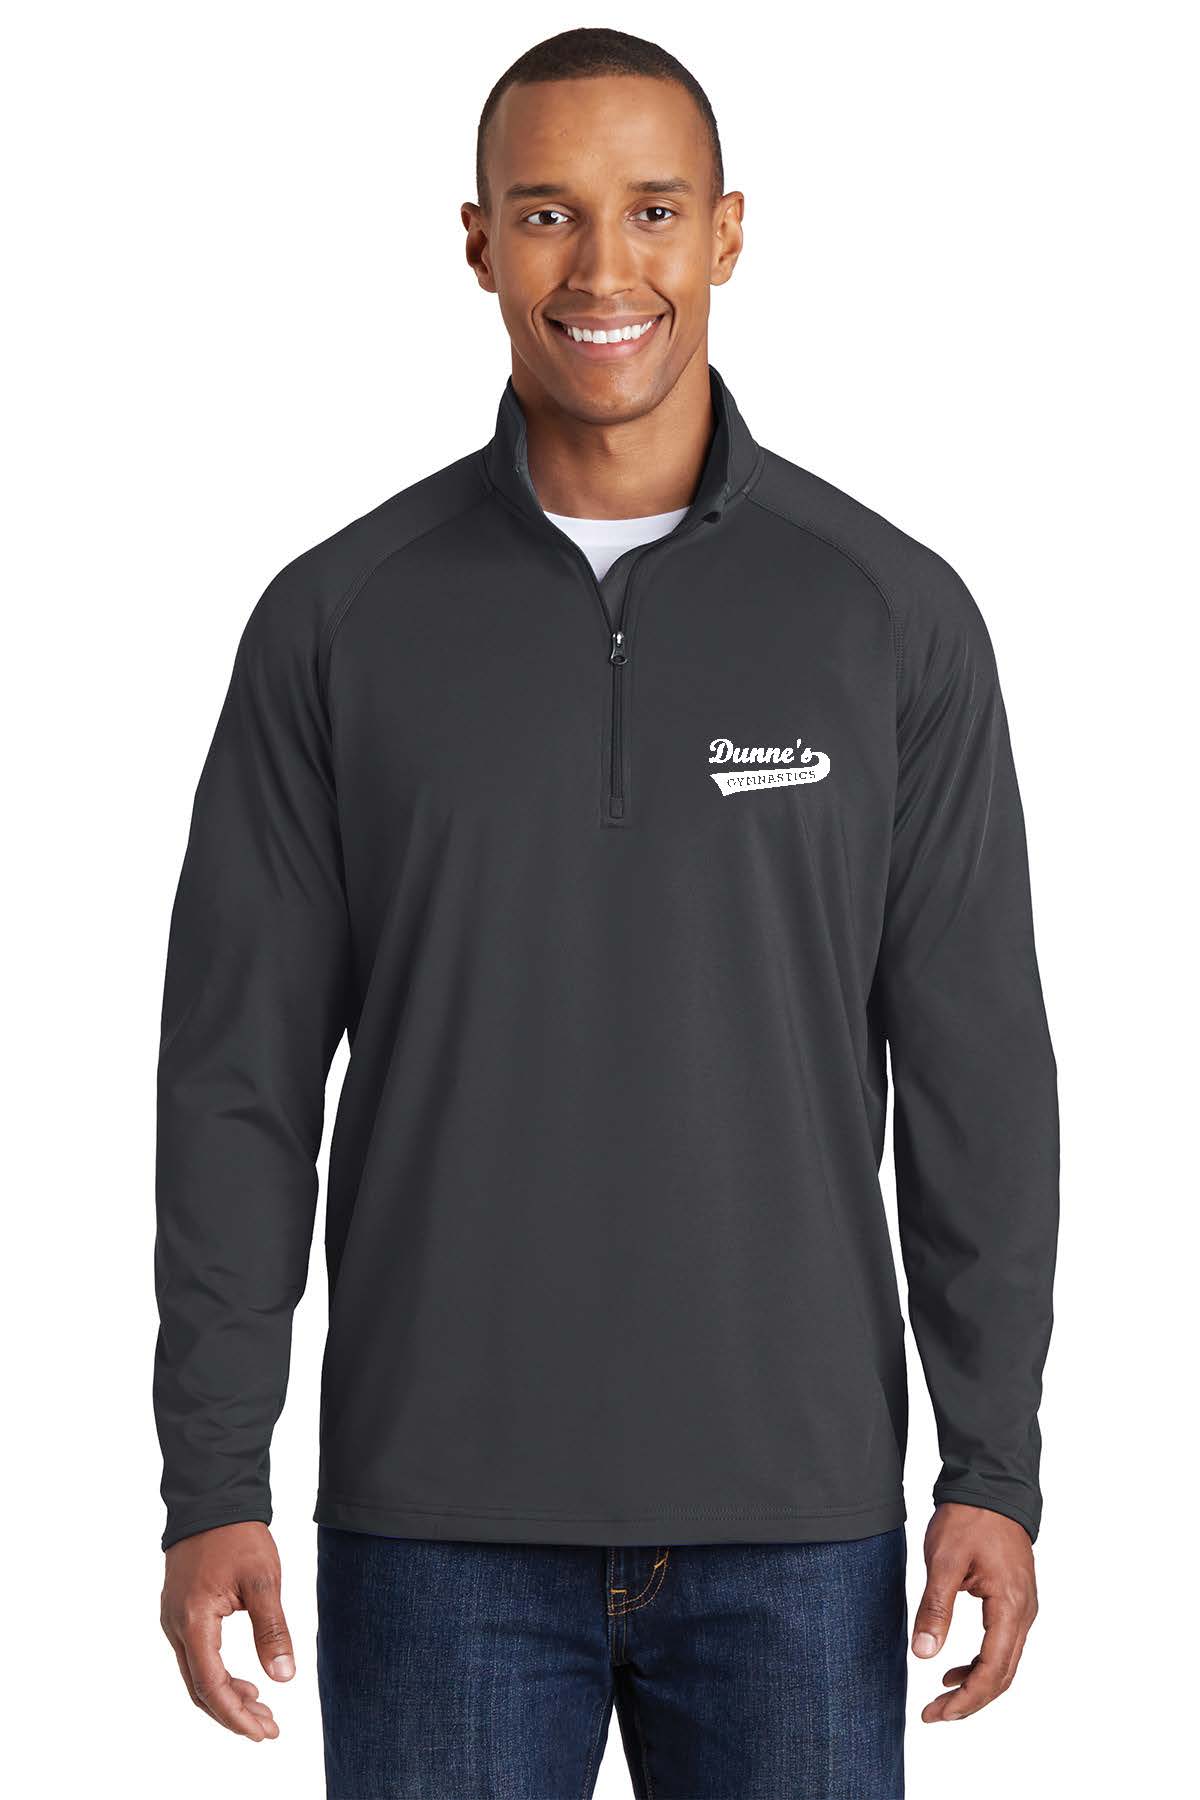 Adult 1/2-Zip Pullover with Dunne's Logo